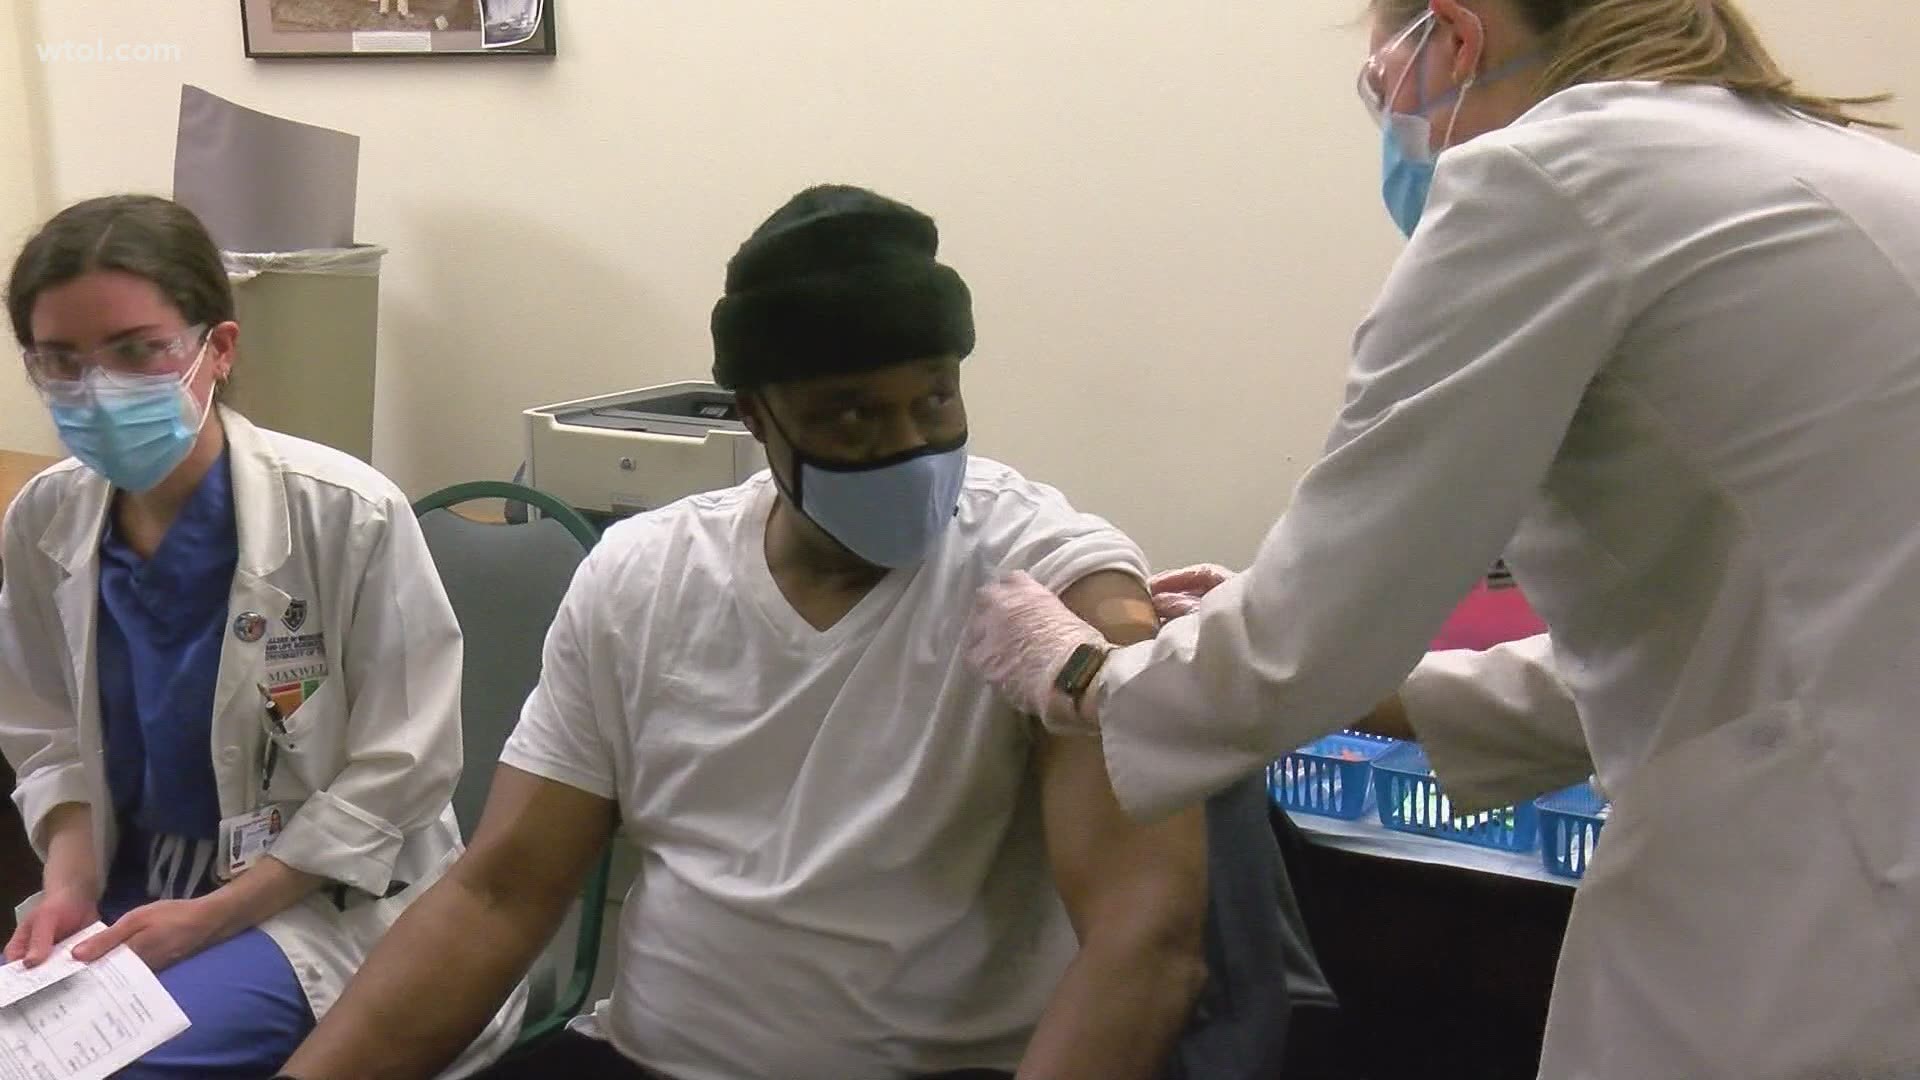 The Farm Labor Organizing Committee is hosting mobile clinics in an effort to boost vaccination numbers among the Latino and Black communities.